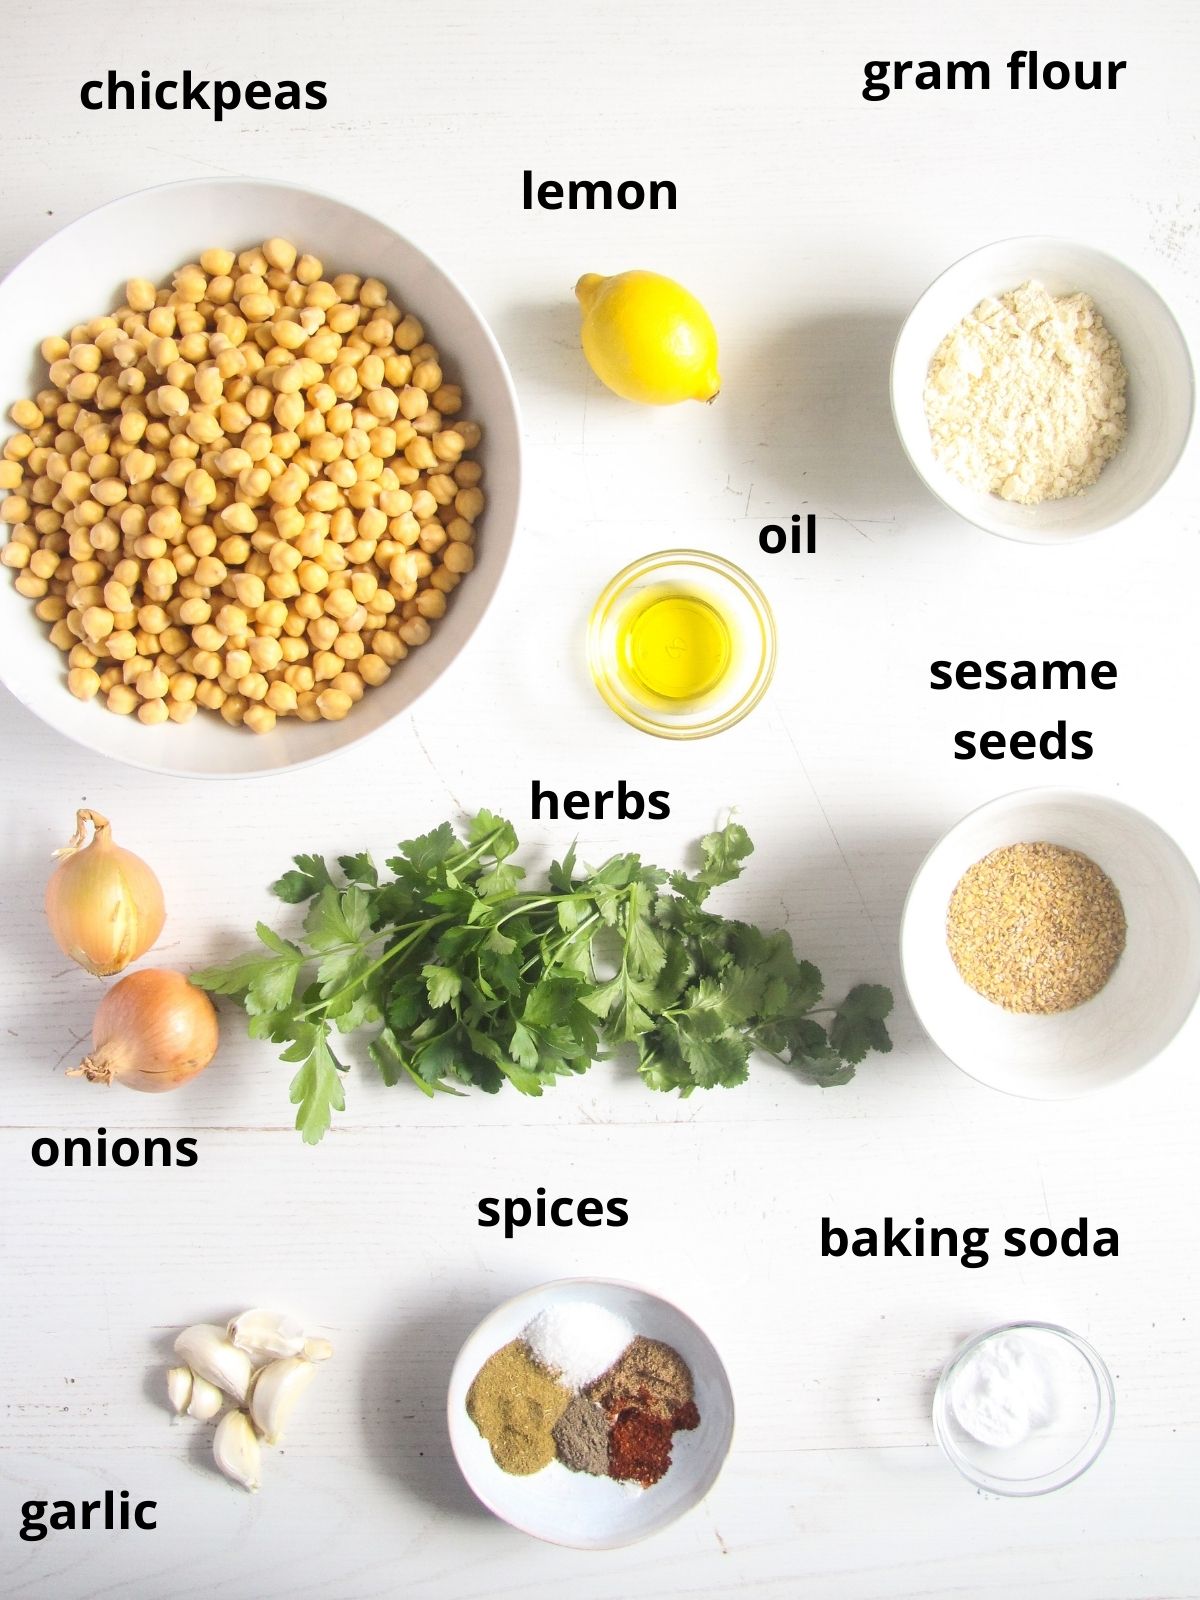 listed ingredients for making falafel on the table.